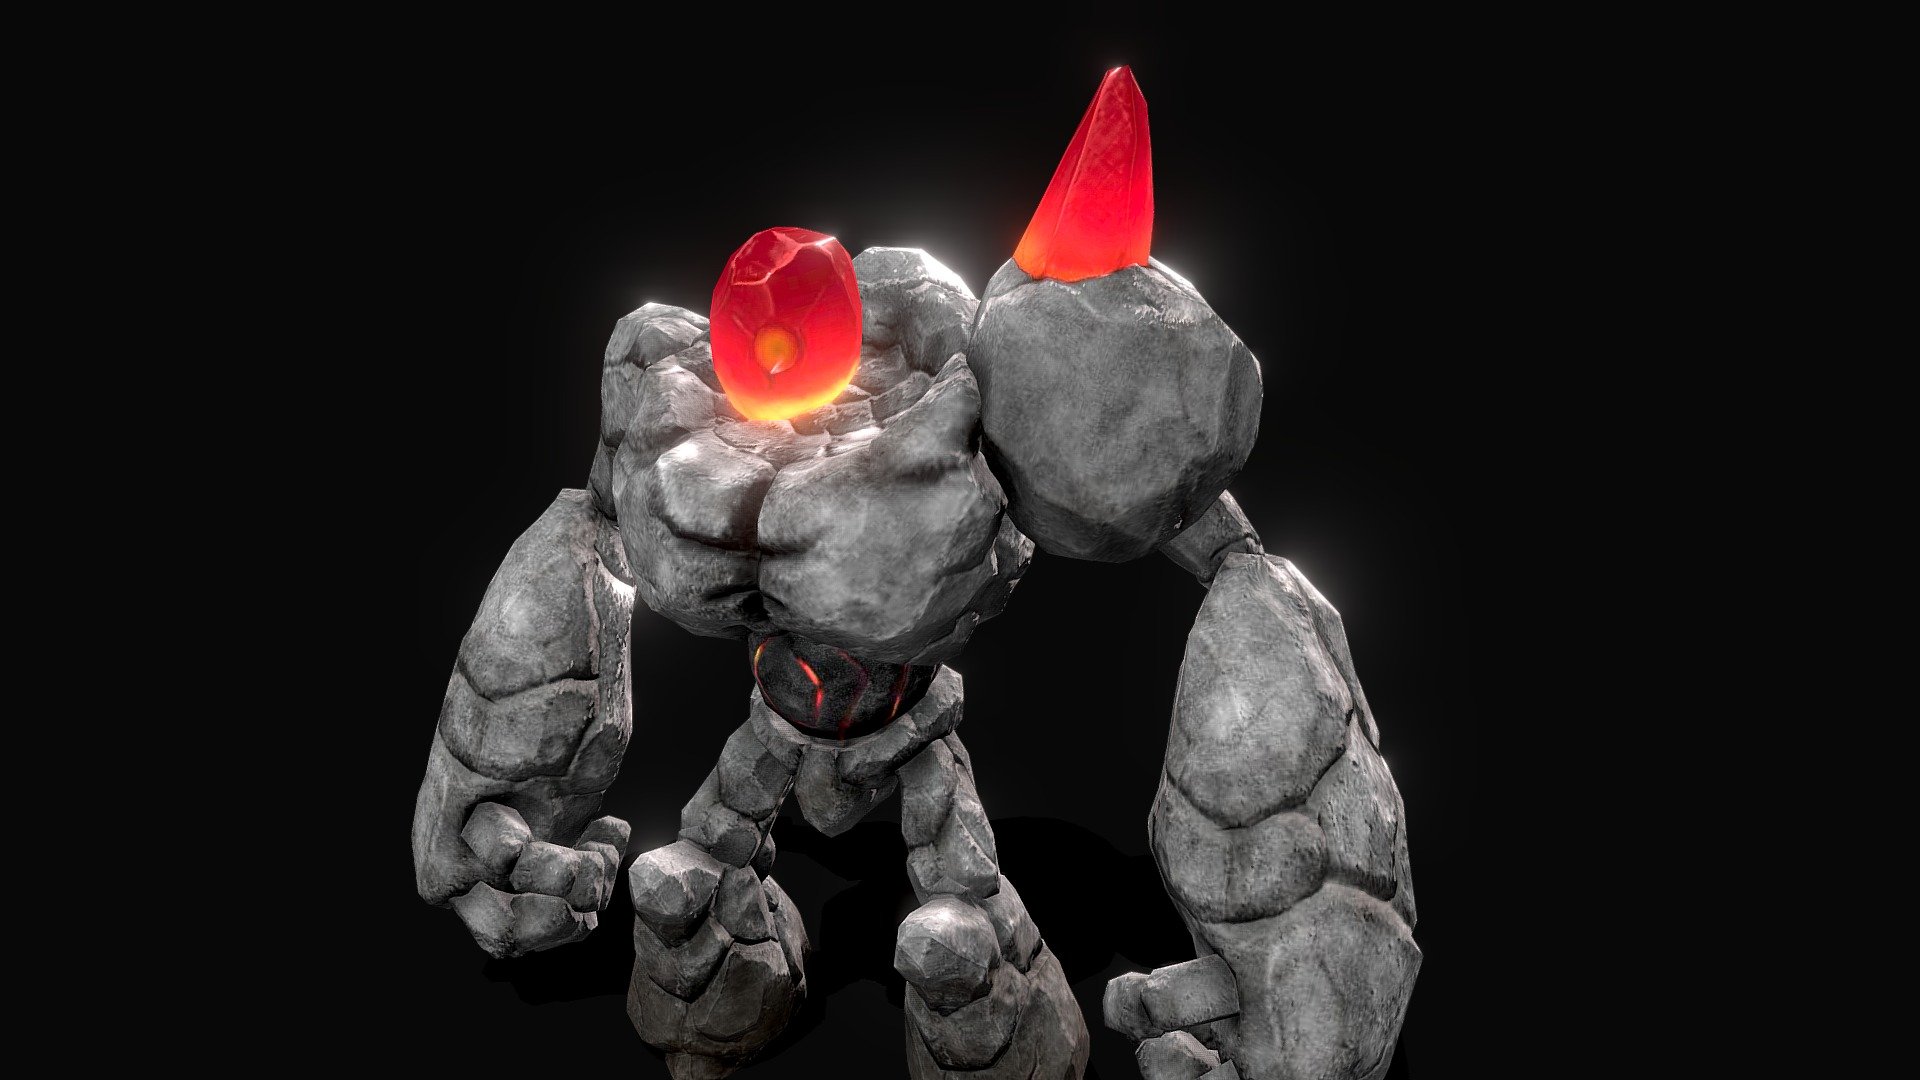 Stone Golem Set -Melee 

Stone Golem with melee attack ability. Suitable to be used with Unity 3D or Unreal Engine 4.


Included animations:

* Idle 1

* Idle 2

* Idle 3

* Walk

* Run

* Attack 1

* Attack 2

* Dead

Check the entire animations in action here: https://www.youtube.com/watch?v=L7Zo89KgA_Y



Package from this Asset contain these 5 other golems:

* Standard Ranged Golem https://sketchfab.com/models/a1436561b67f476baecd0599e23c18a0

* Standard Siege Golem https://sketchfab.com/models/e6b9f81fb38449ff8b872213d68ec4b4

* Super Melee Golem https://sketchfab.com/models/3187f153db5d438588b25392eee1d468

* Super Ranged Golem https://sketchfab.com/models/a7bbf07e071f40ad83ef37987a5e4f11

* Super Siege Golem https://sketchfab.com/models/4fbd37554df649799d9d336bf7eaee5d
 - Golem - Melee (Stone Golem Set Purchaseable) - Buy Royalty Free 3D model by willpowaproject 3d model